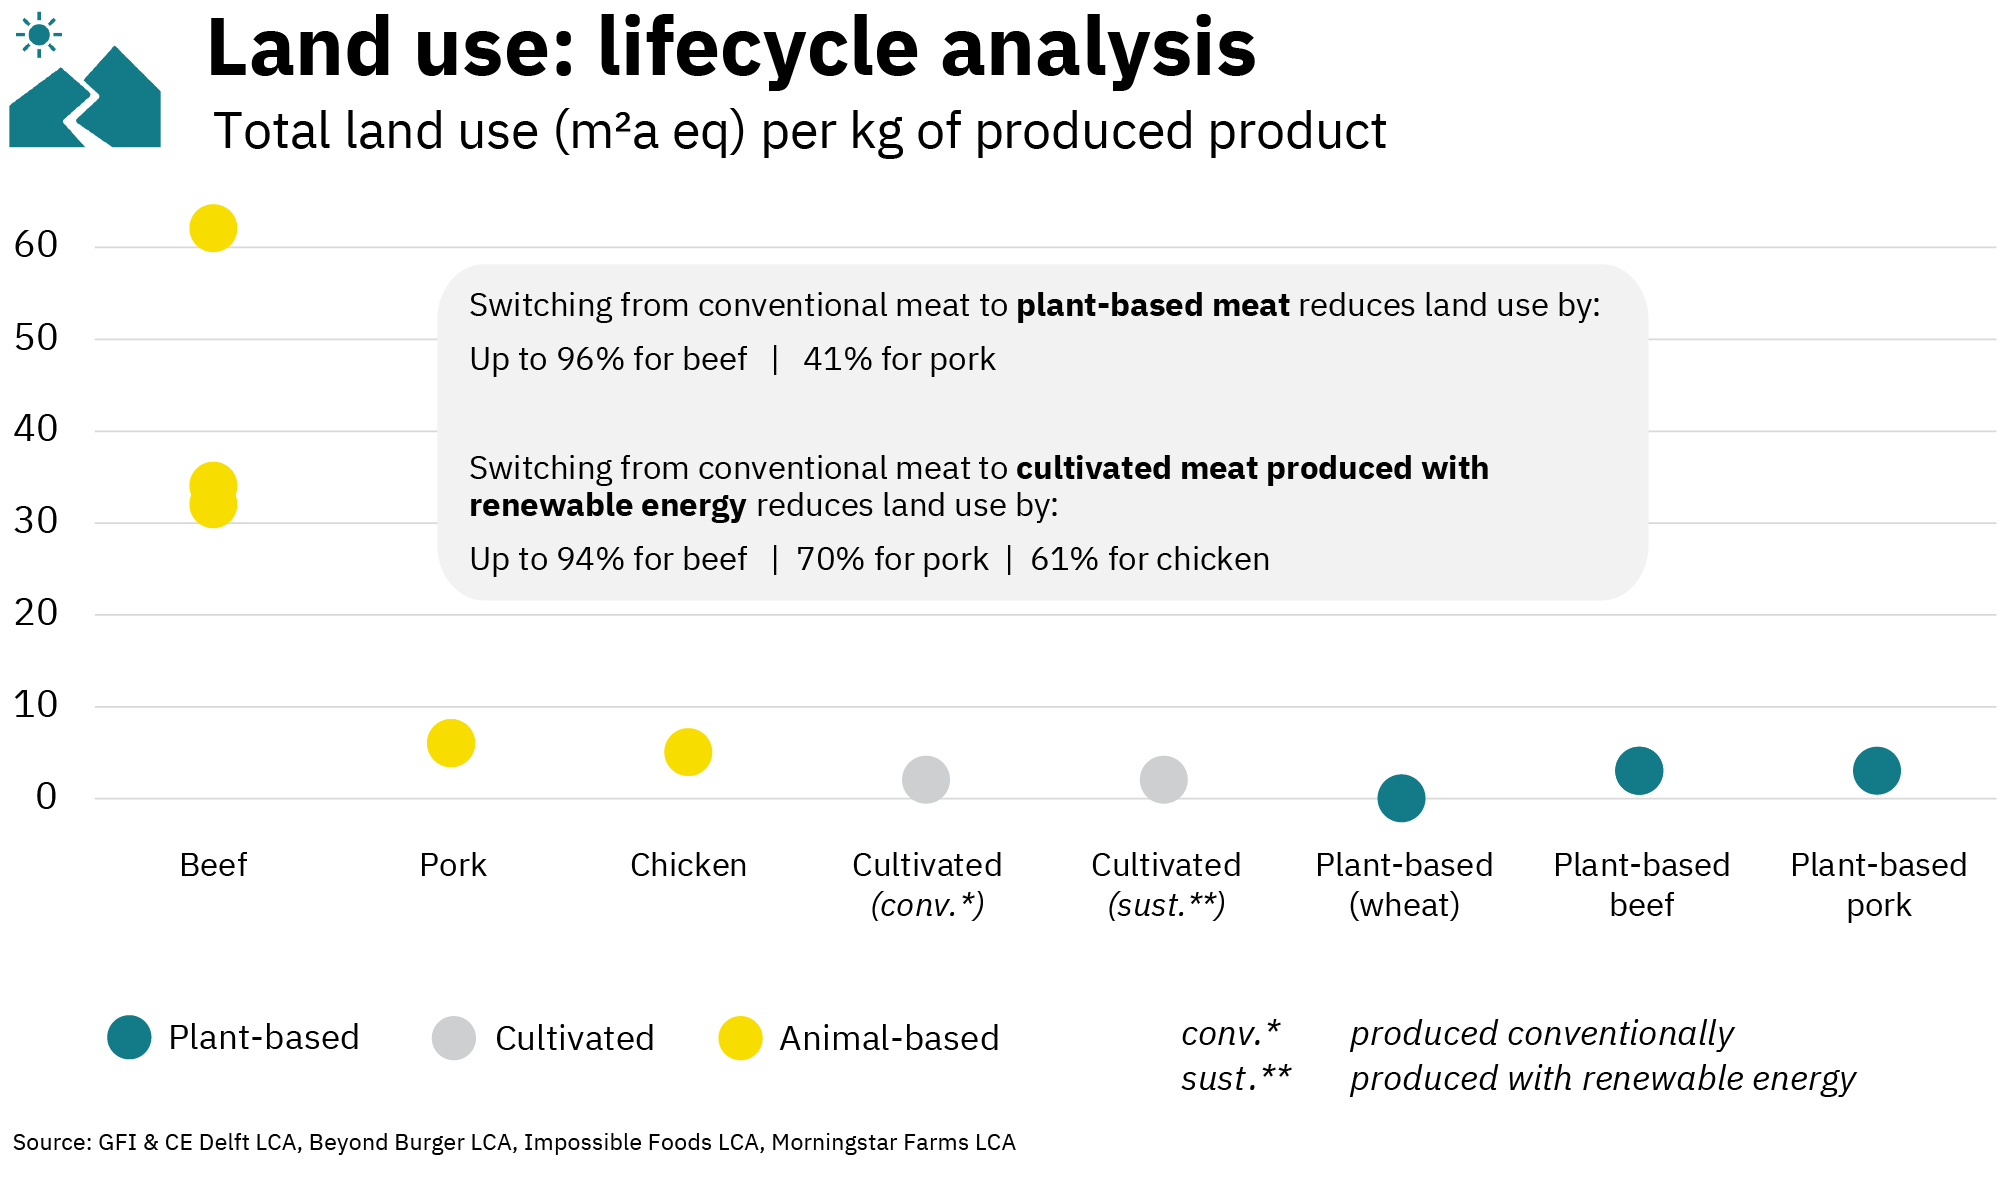 A land use lifecycle analysis graph showing that the switch from conventional meat to plant-based meat reduces land use by up to 96% for beef and 41% for pork. Switching from conventional meat to cultivated meat produced with renewable energy reduces land use by up to 94% for beef, 70% for pork, and  61% for chicken.